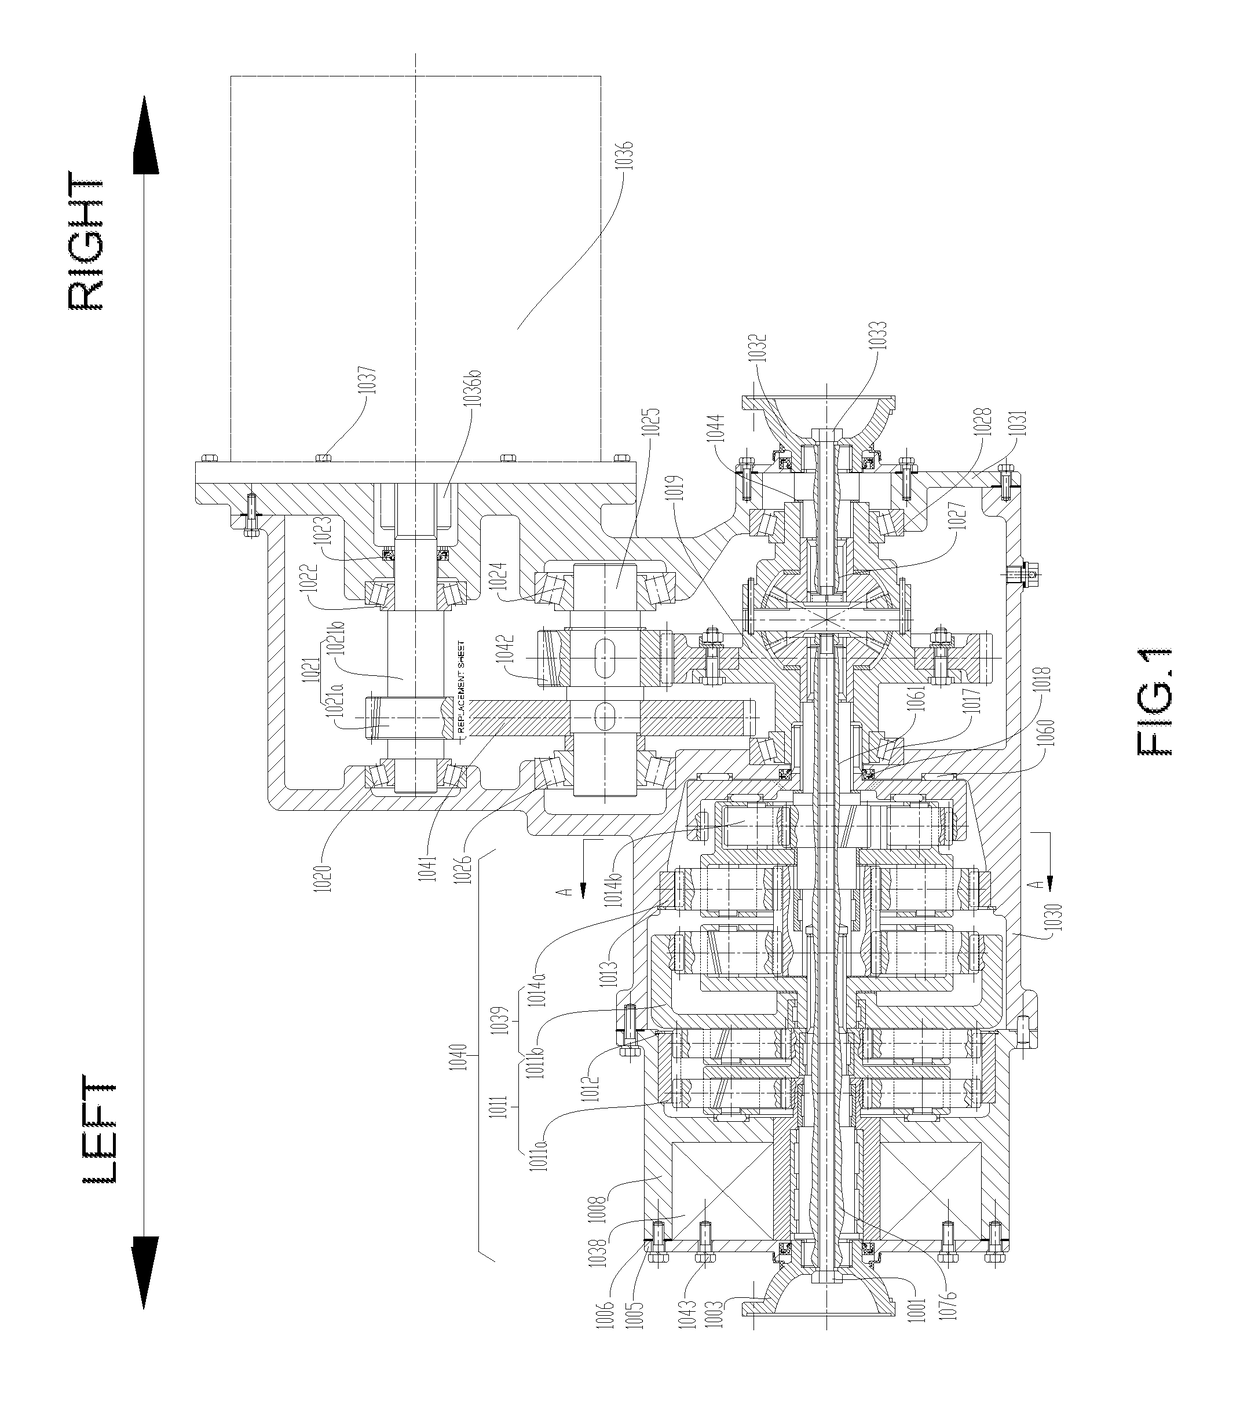 Drive axle of electric distribution torque